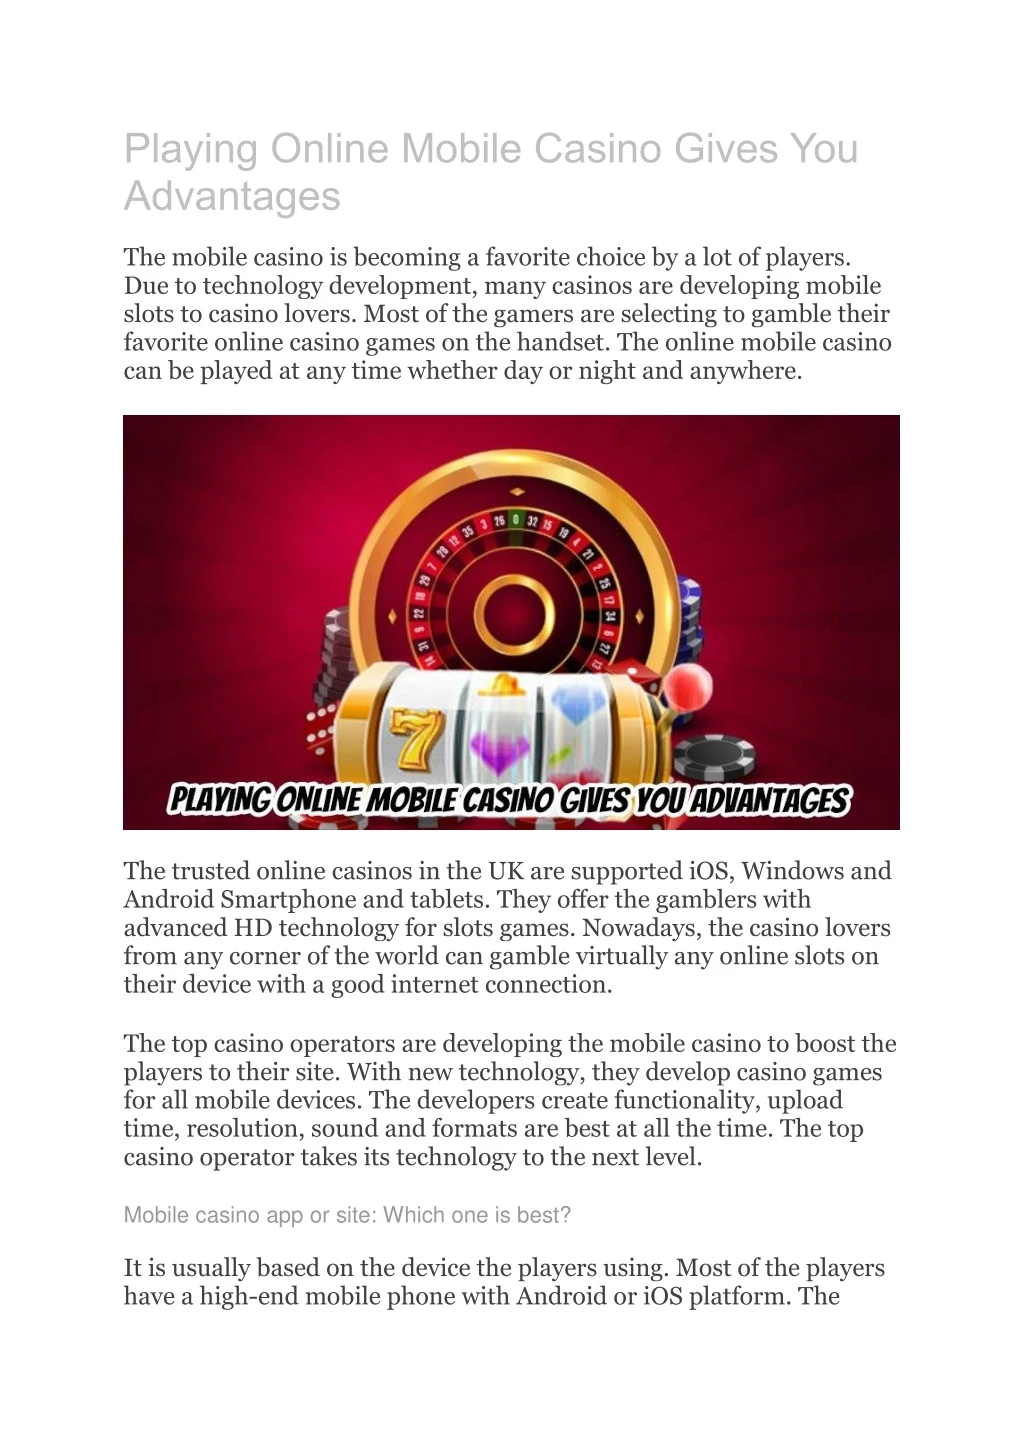 playing online mobile casino gives you advantages